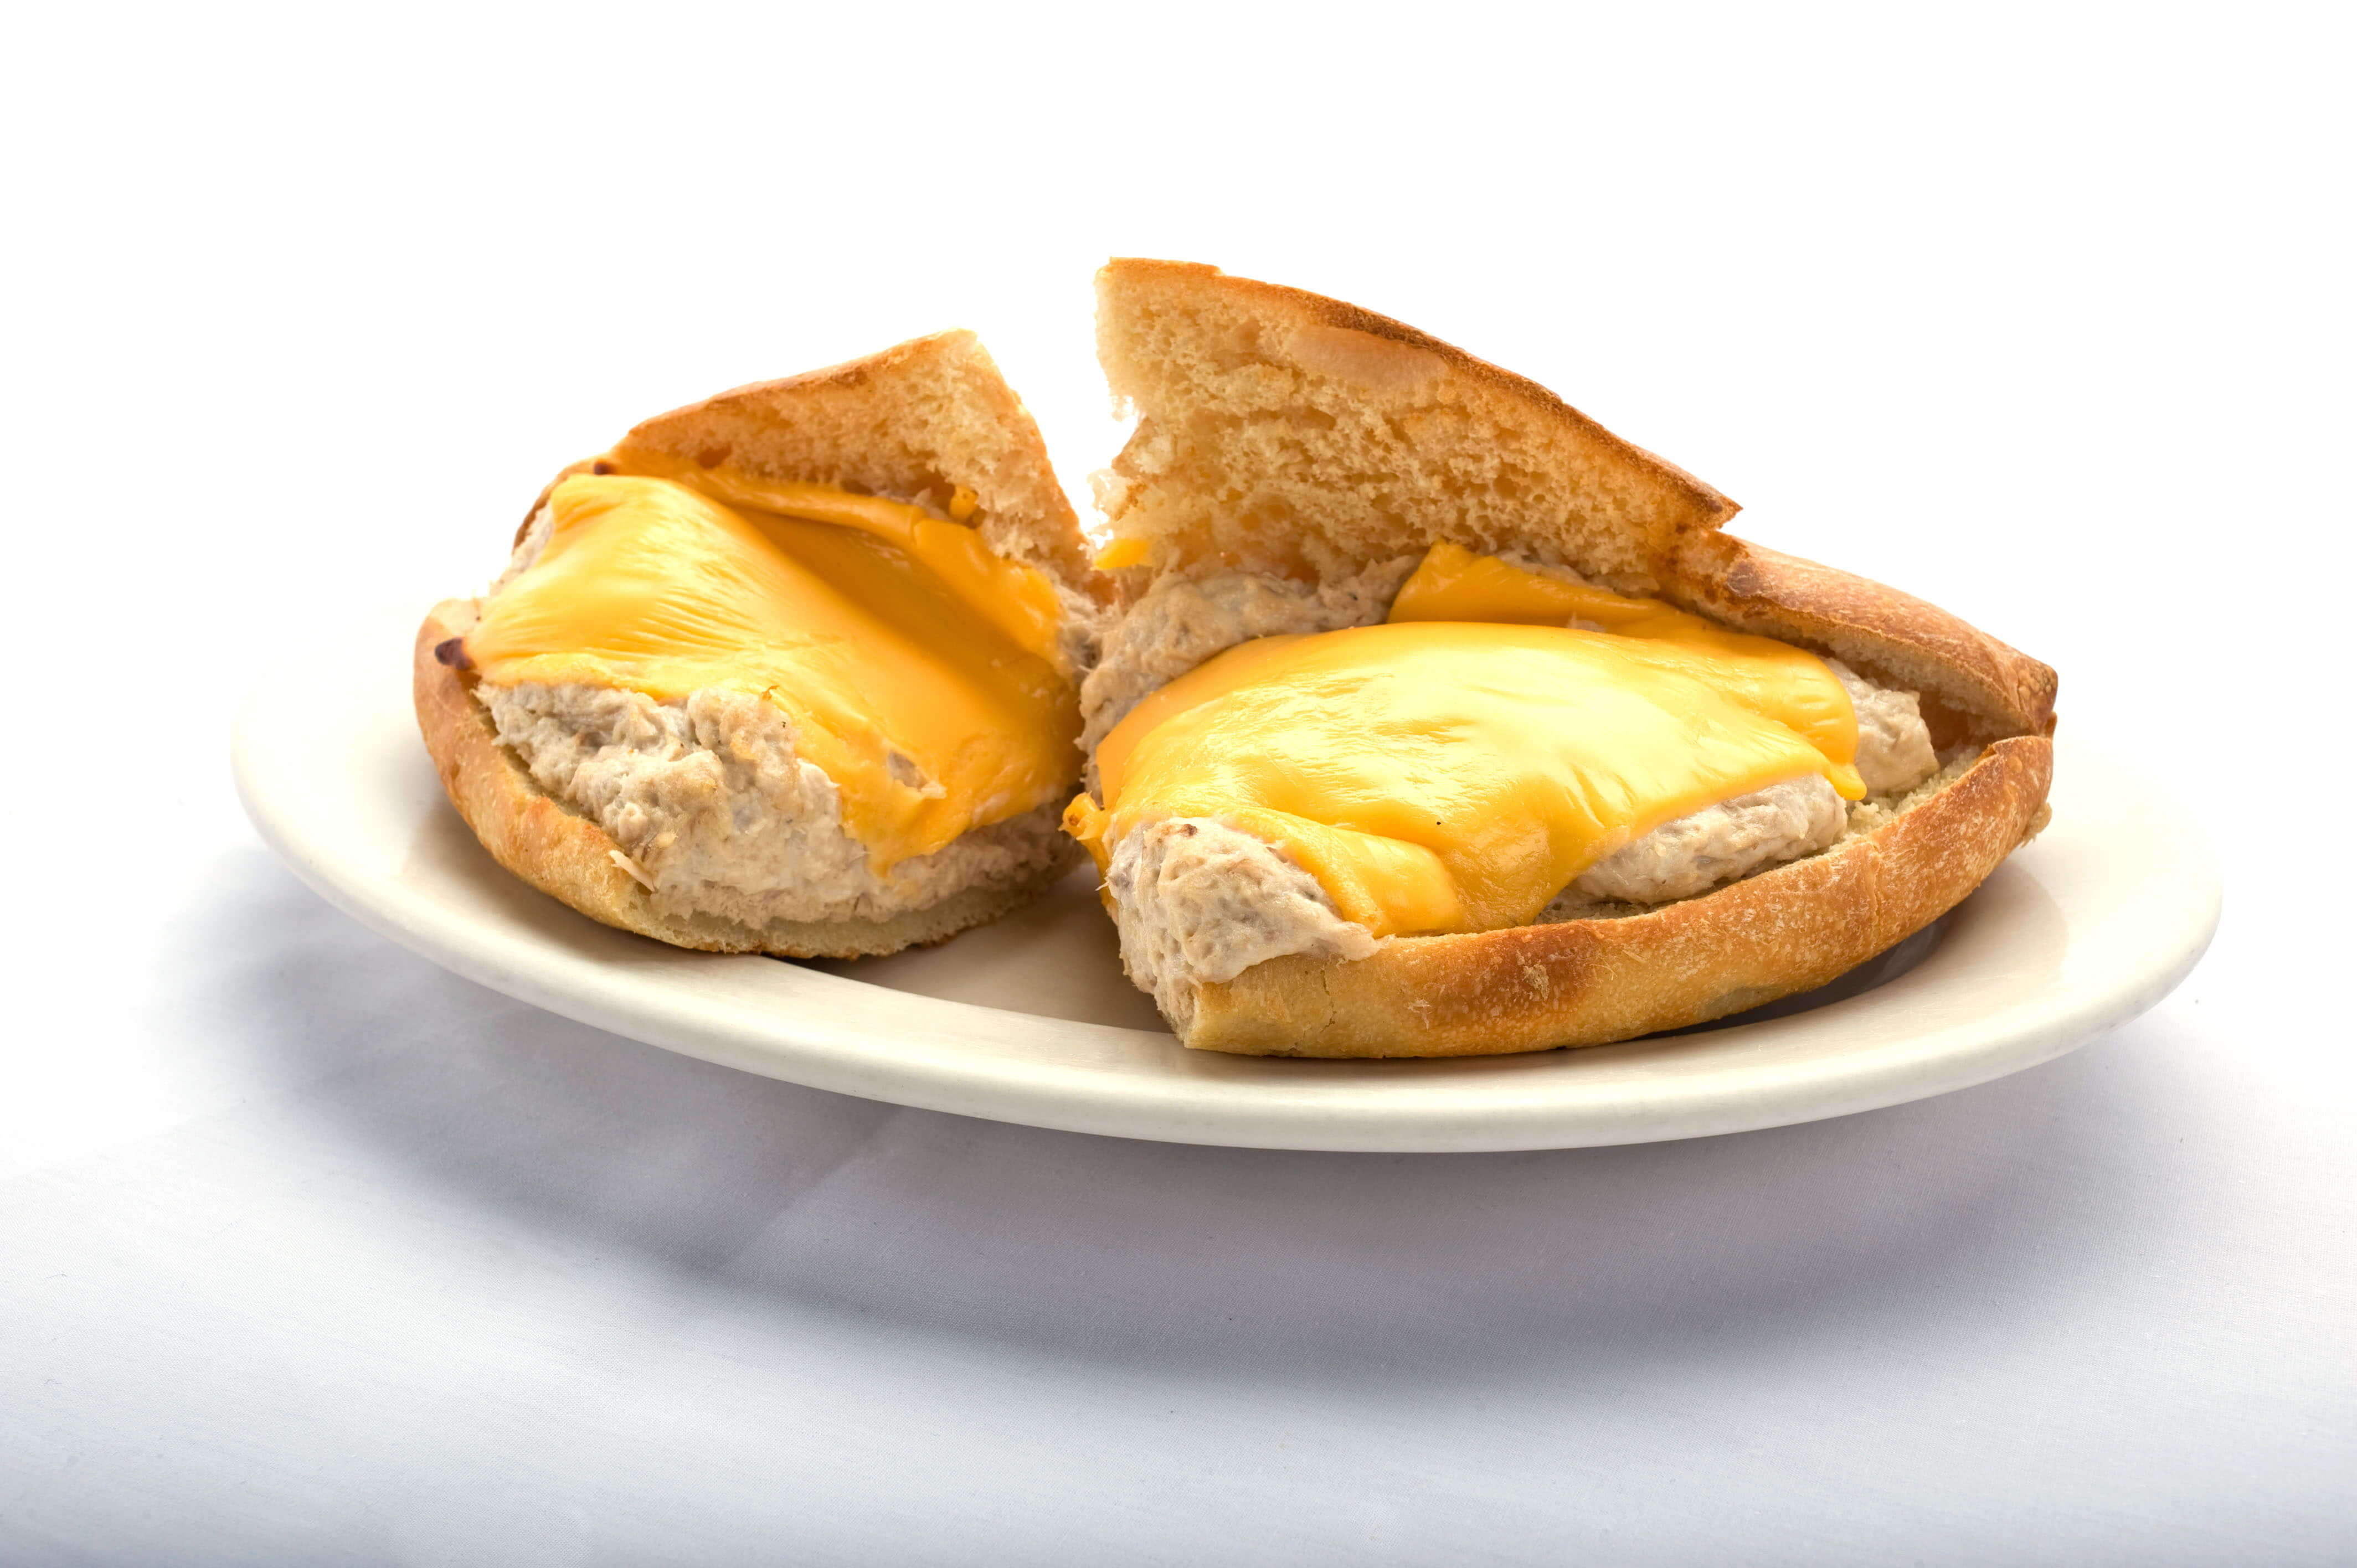 A delicious tuna melt sandwich with cheese on a plate, served from Genova's To Go. Enjoy this mouthwatering treat!